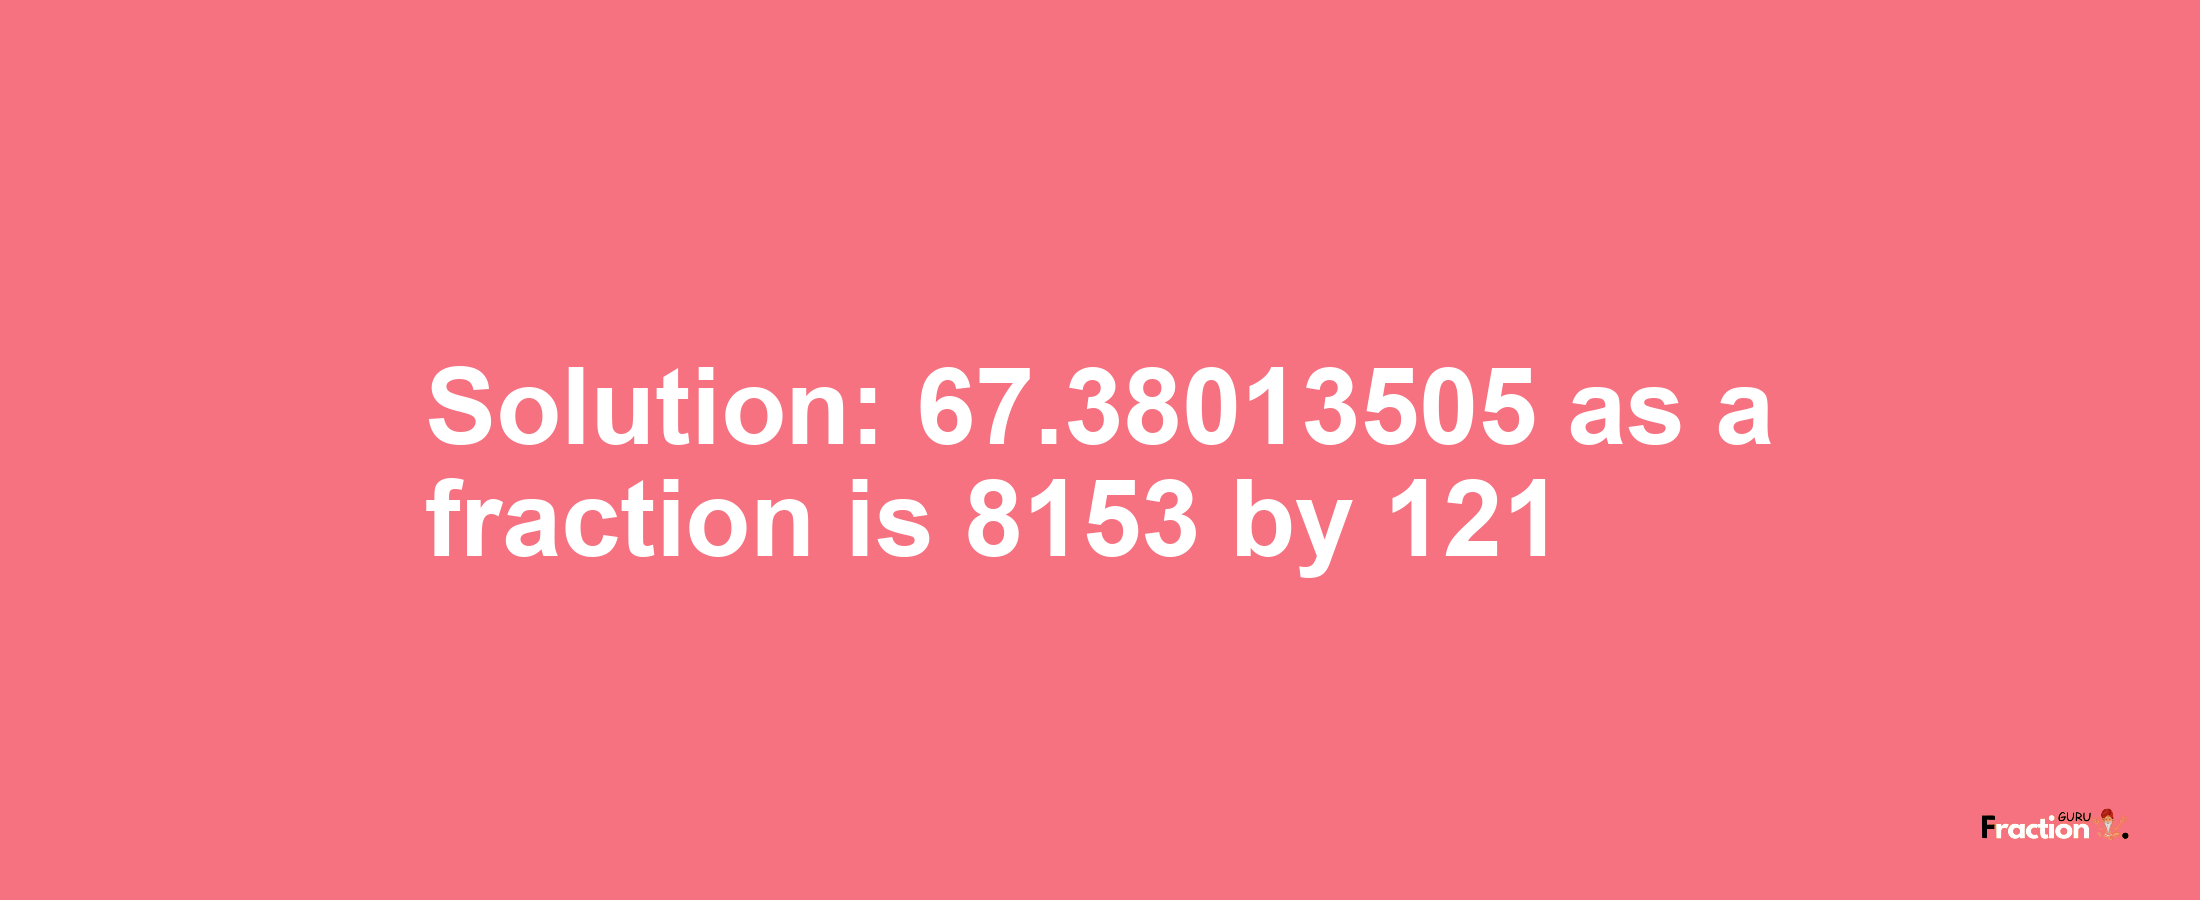 Solution:67.38013505 as a fraction is 8153/121